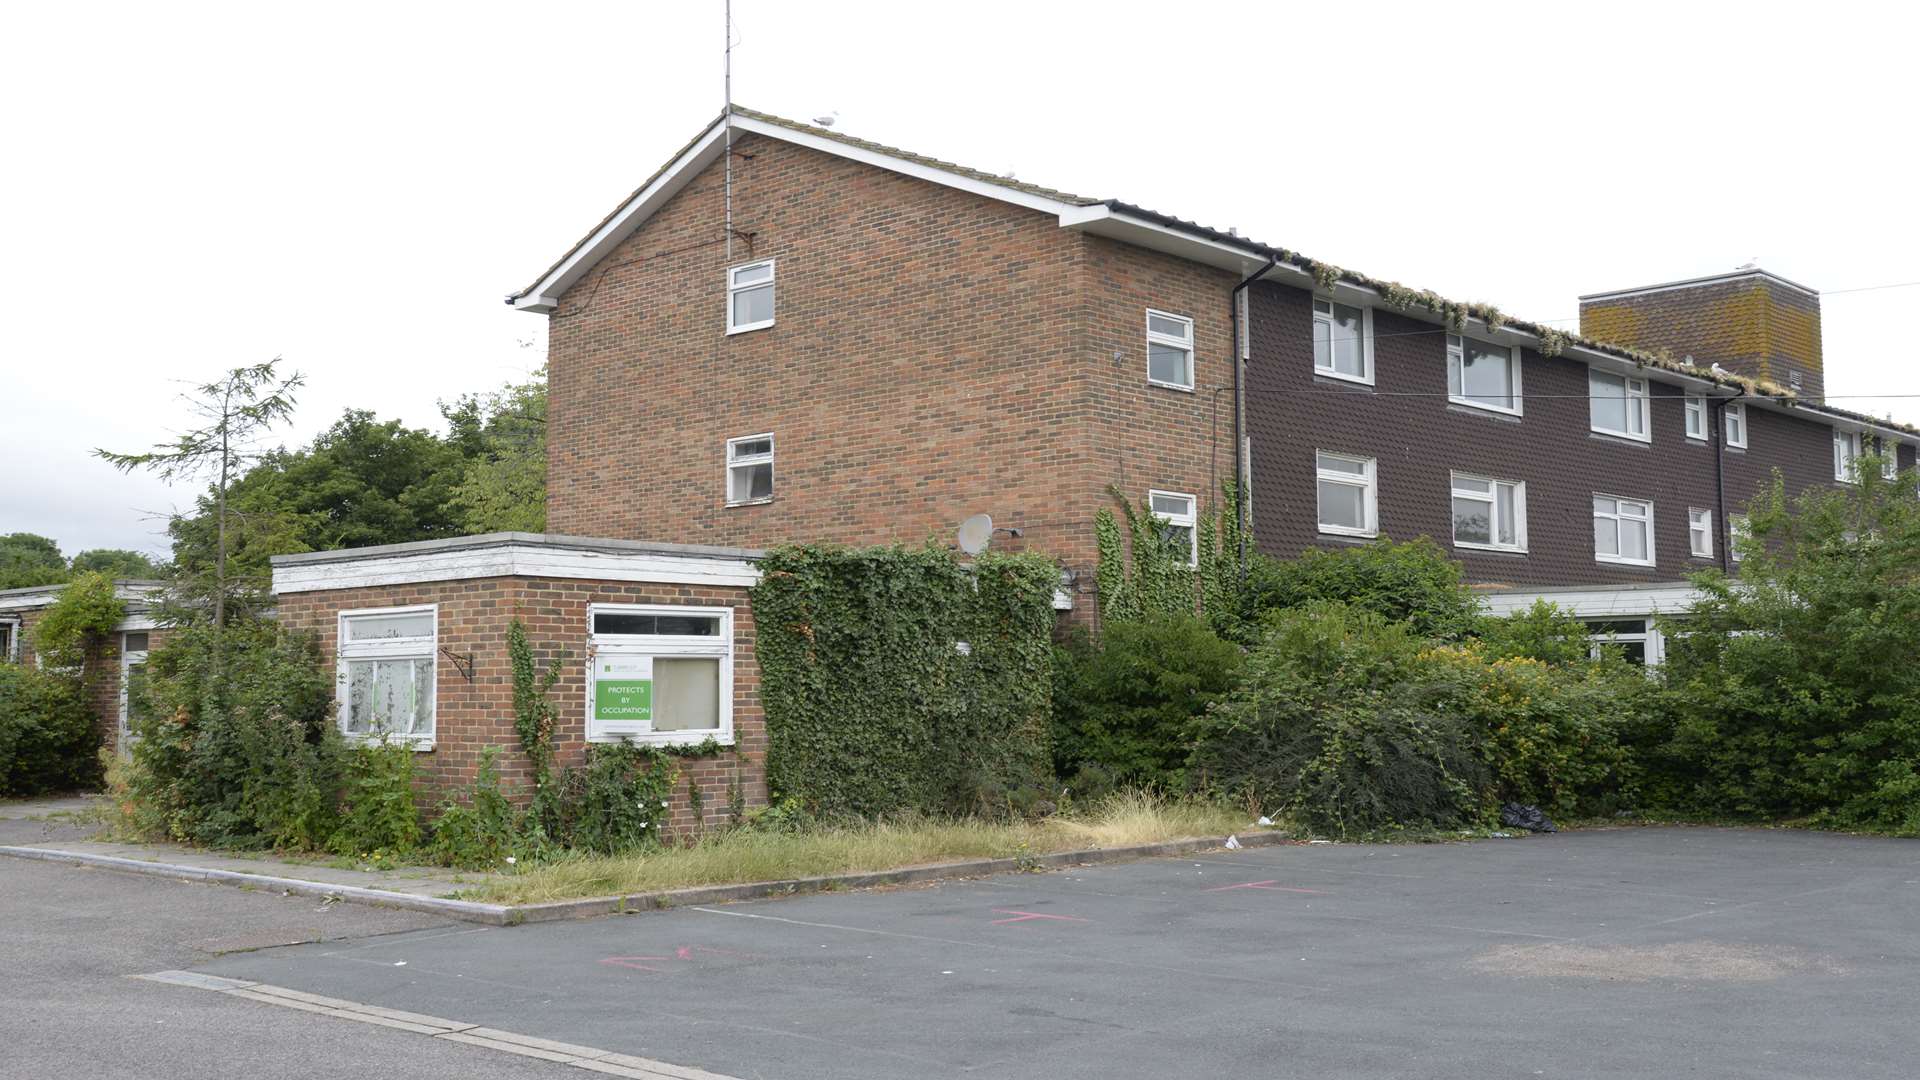 The former Ladesfield Care Home is a temporary asylum seeker centre